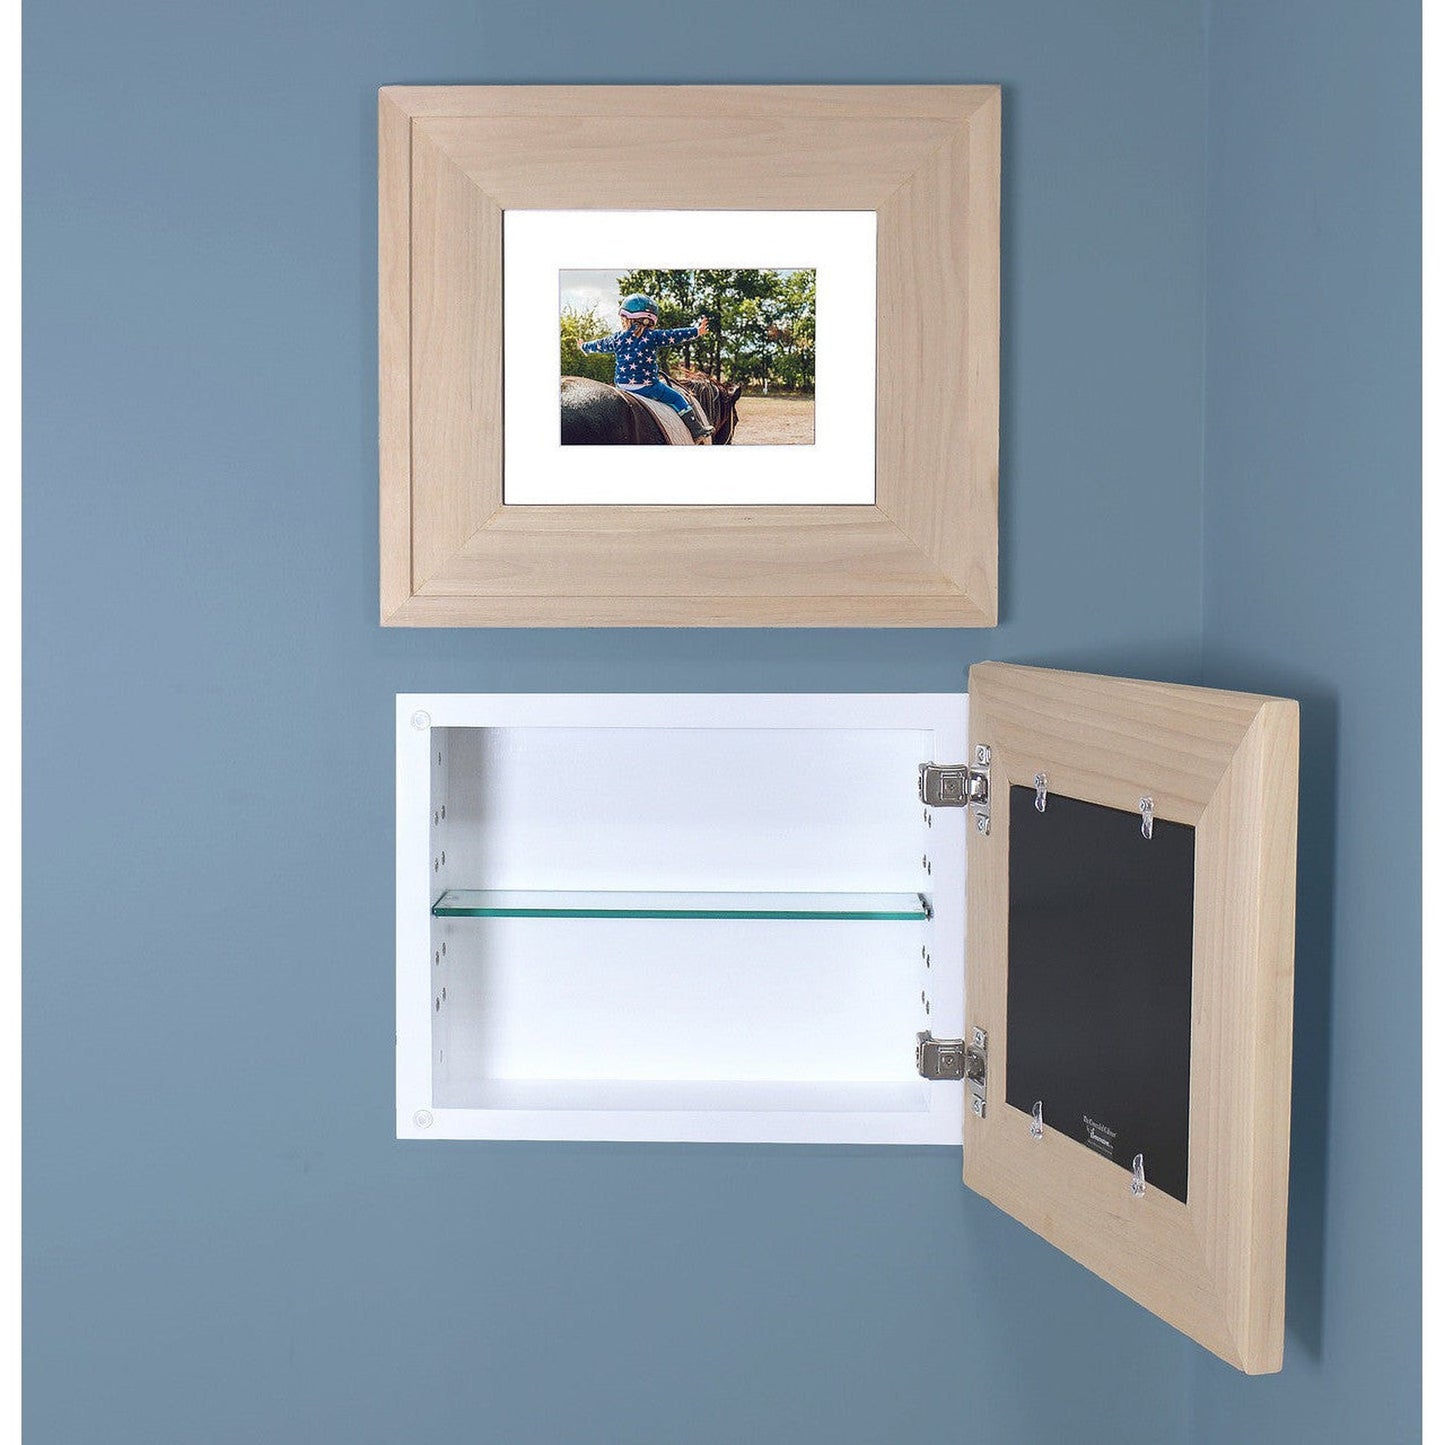 Fox Hollow Furnishings 14" x 11" Unfinished Raised Edge Compact Landscape Standard 4" Depth Recessed Picture Frame Medicine Cabinet With Mirror and White Matting